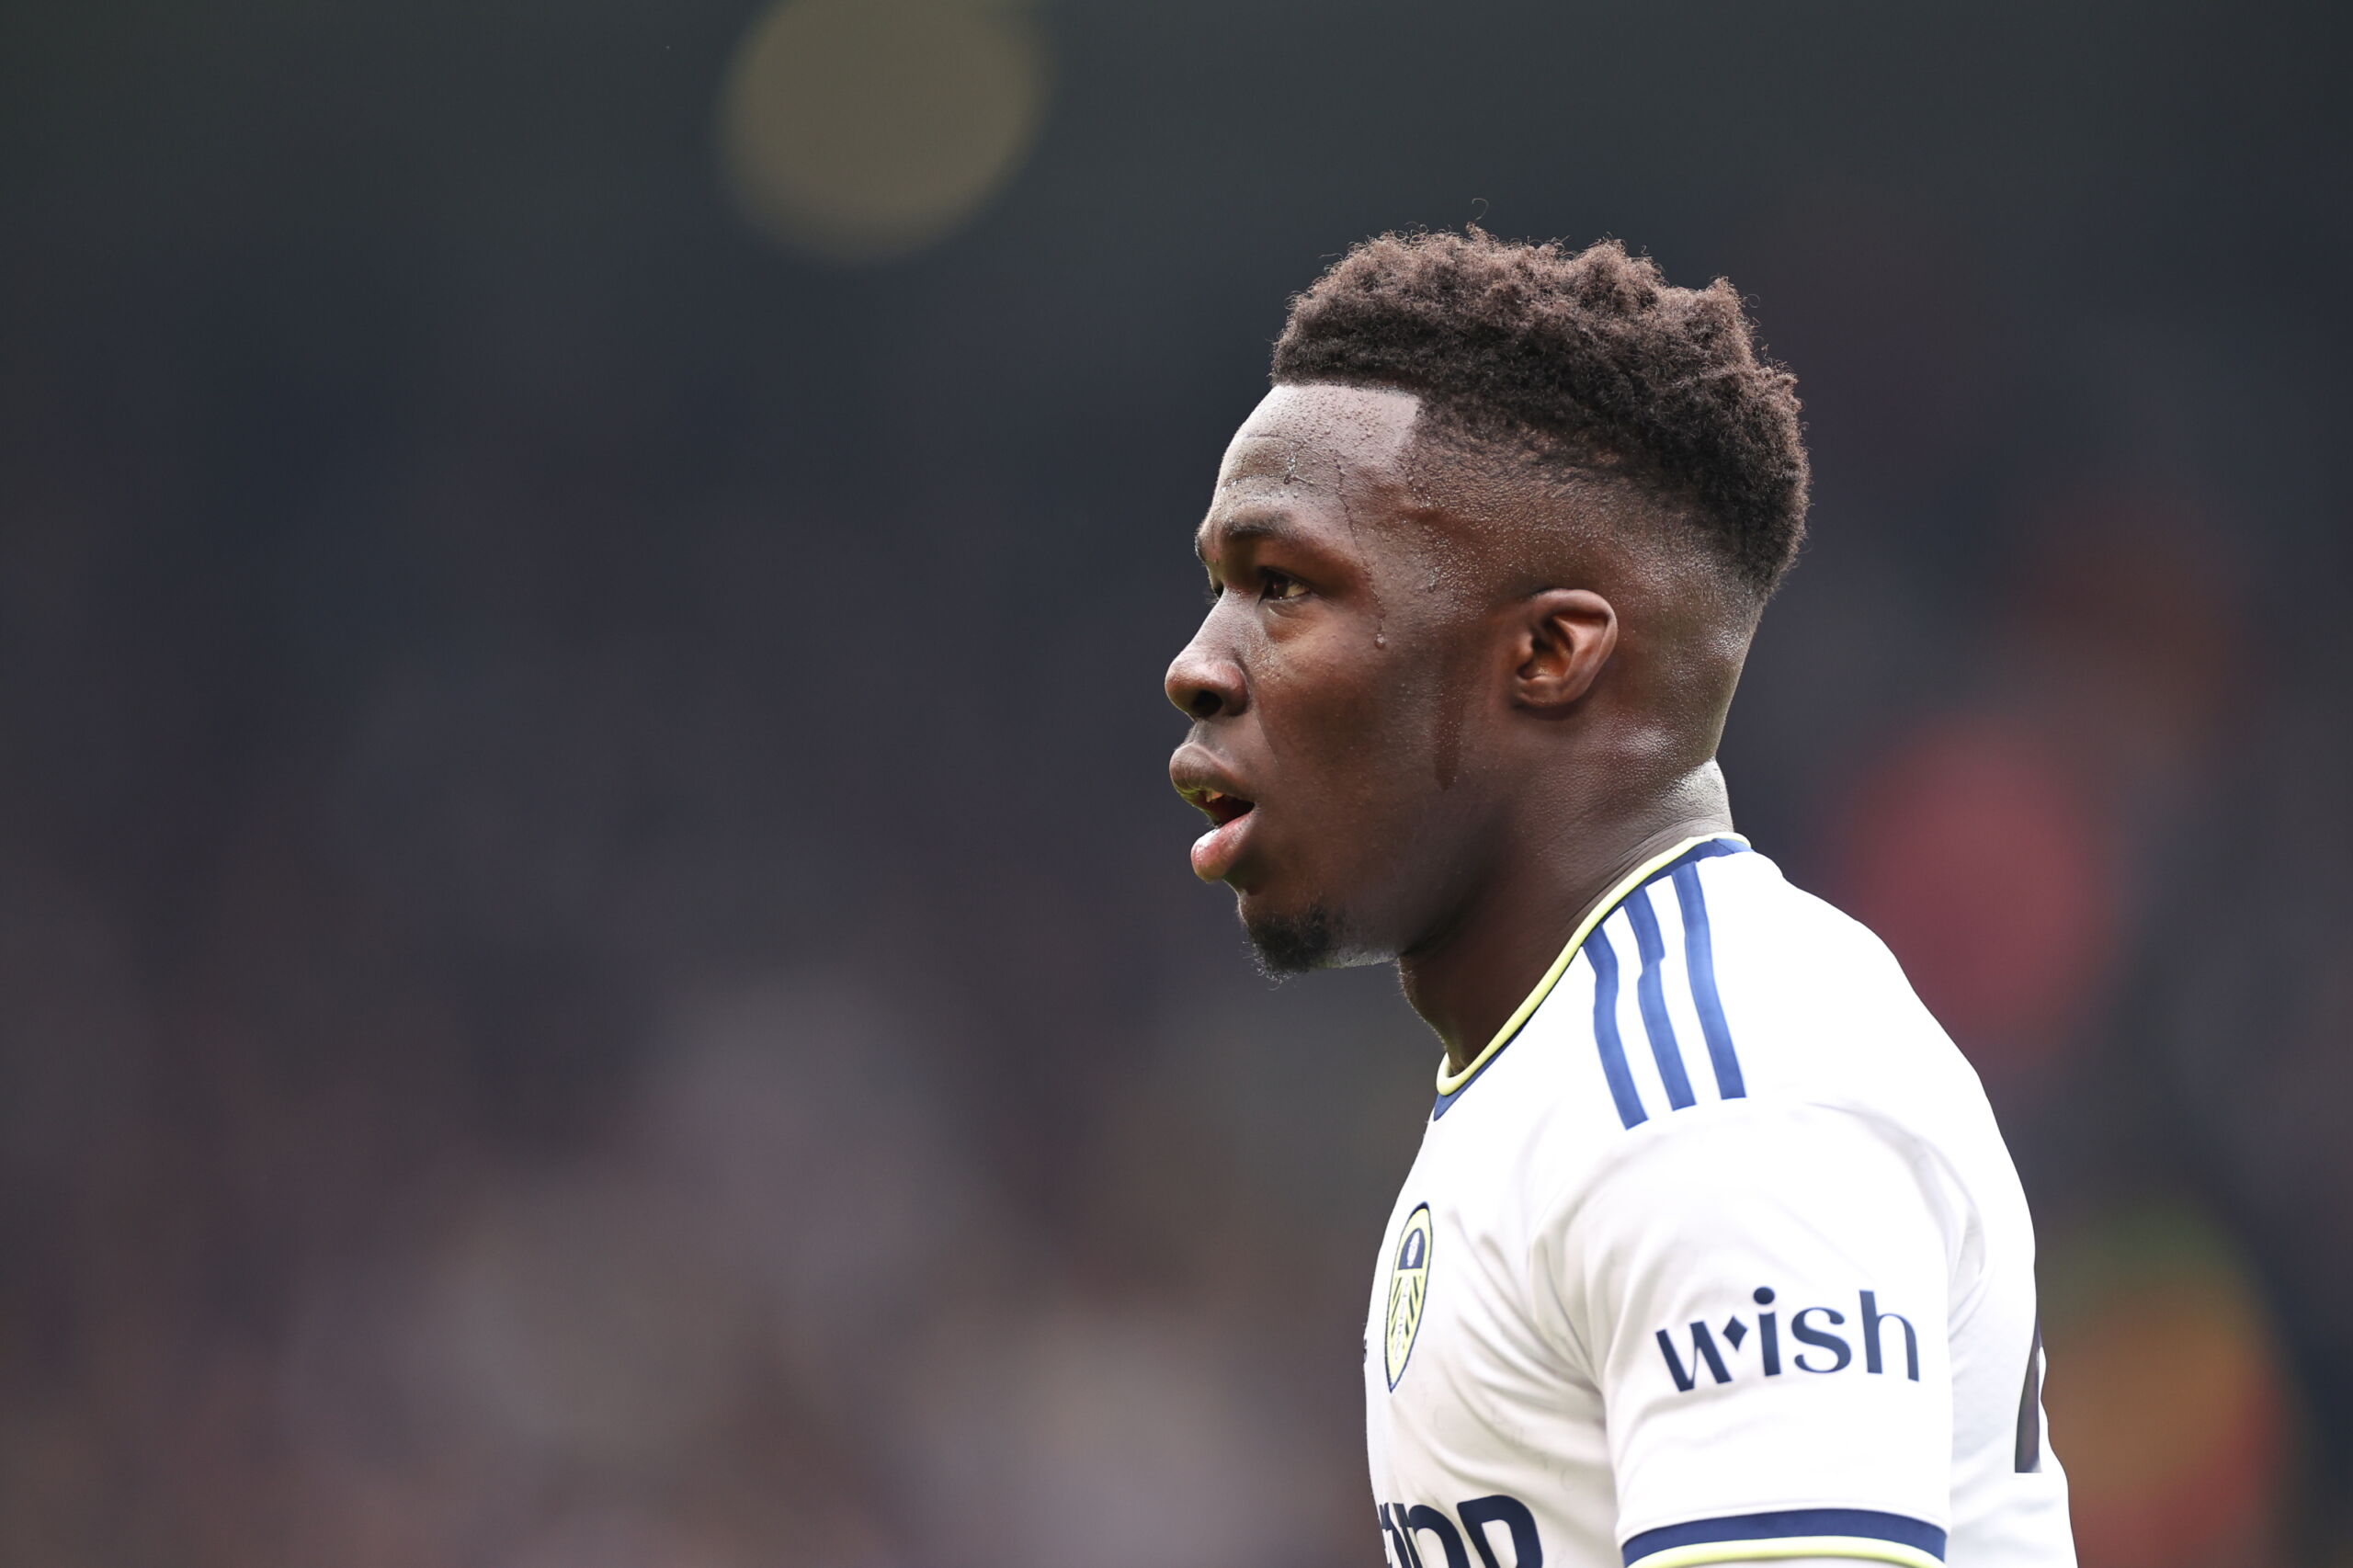 Milan and Fiorentina have inquired about Wilfried Gnonto, who could leave Leeds United following the relegation to the Championship.